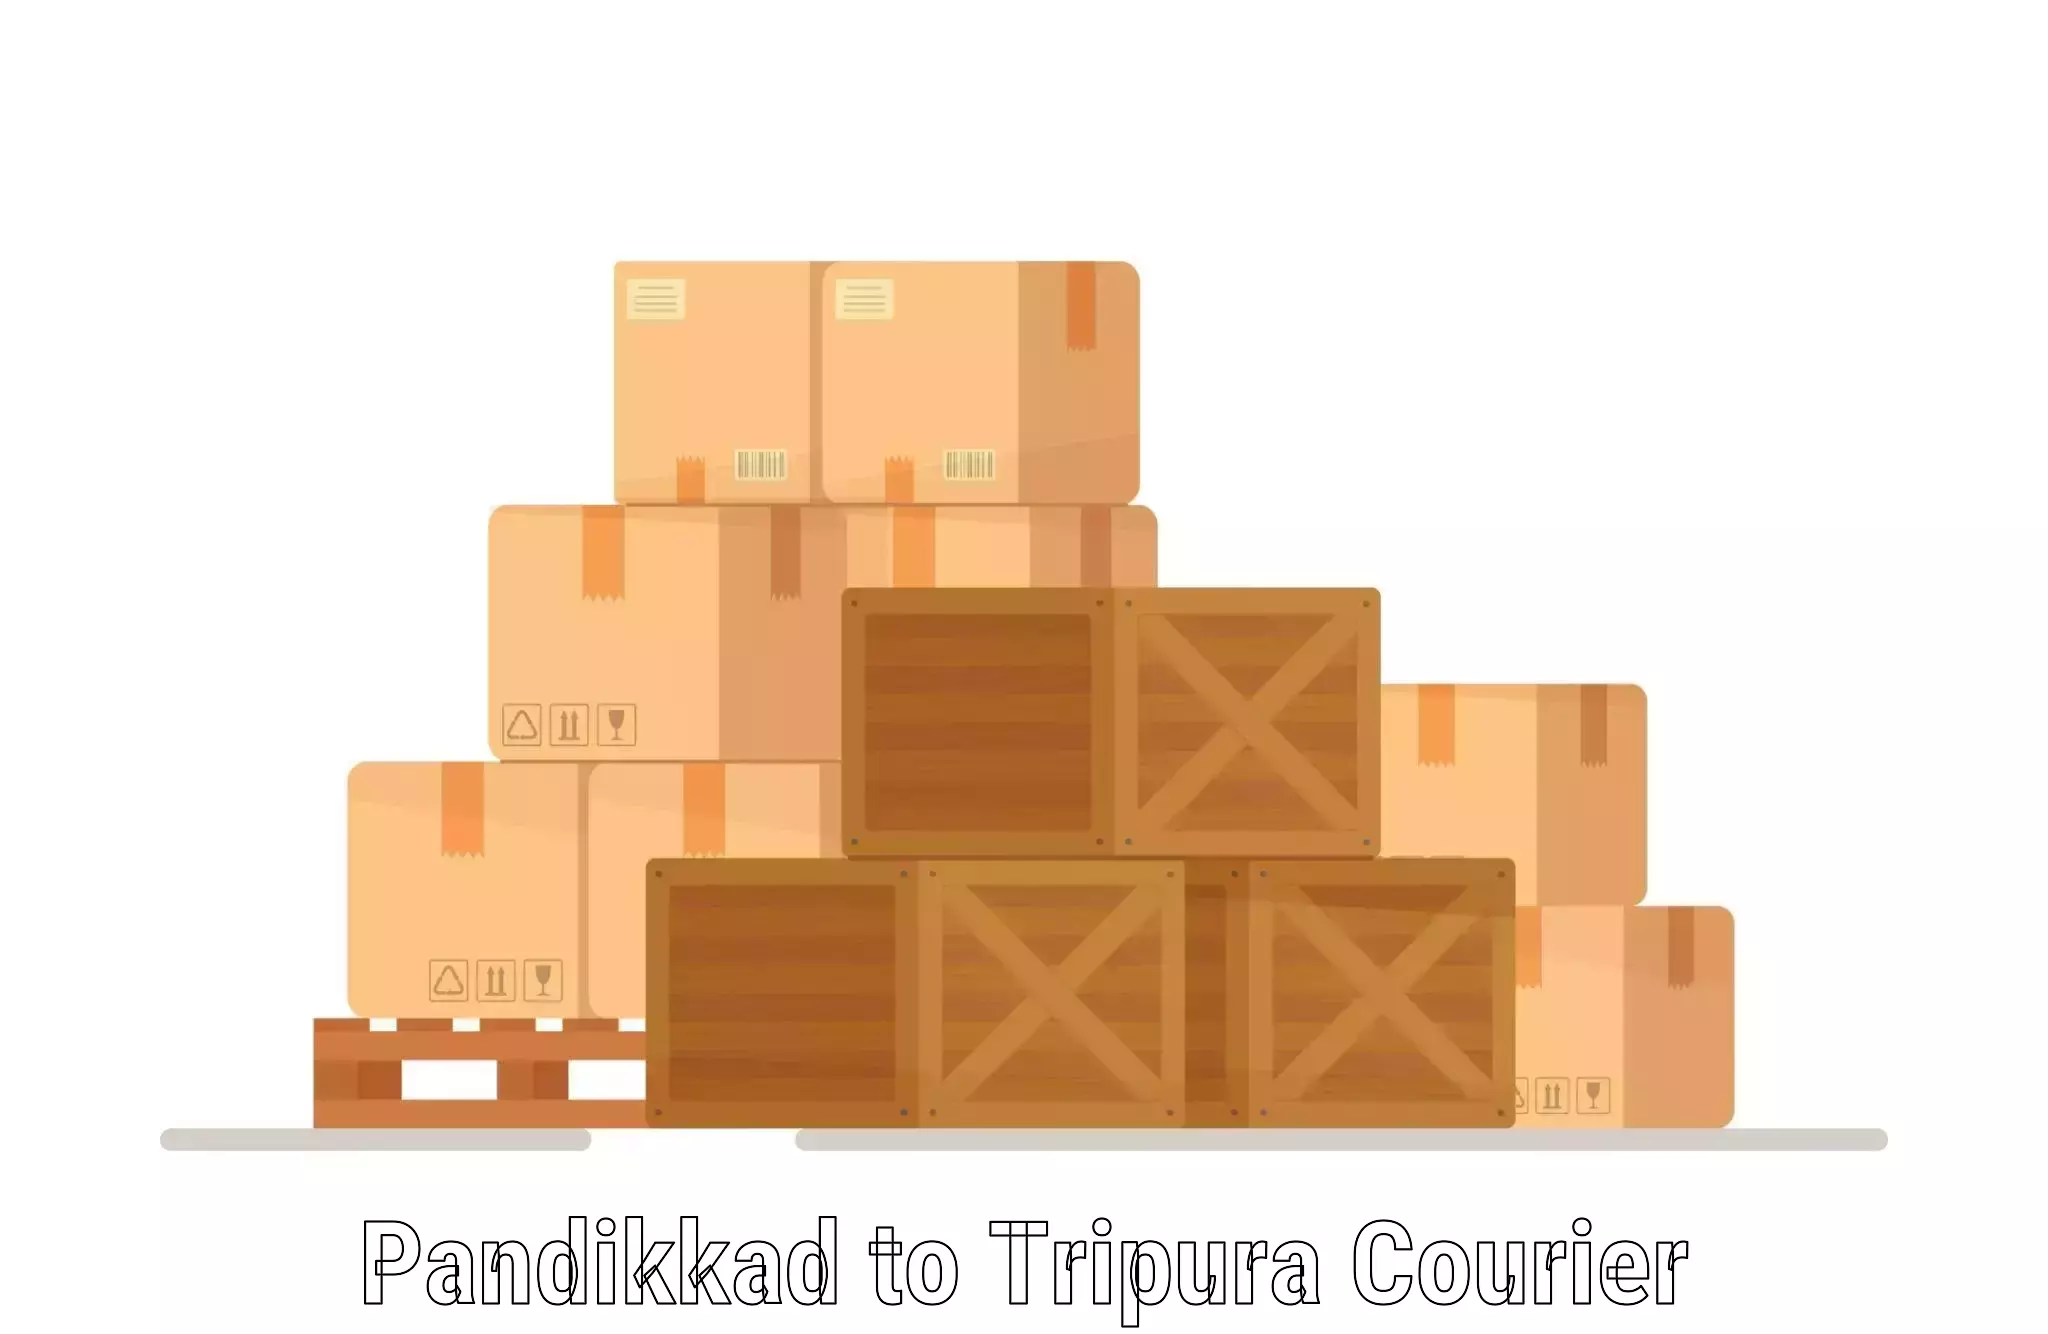 State-of-the-art courier technology Pandikkad to South Tripura